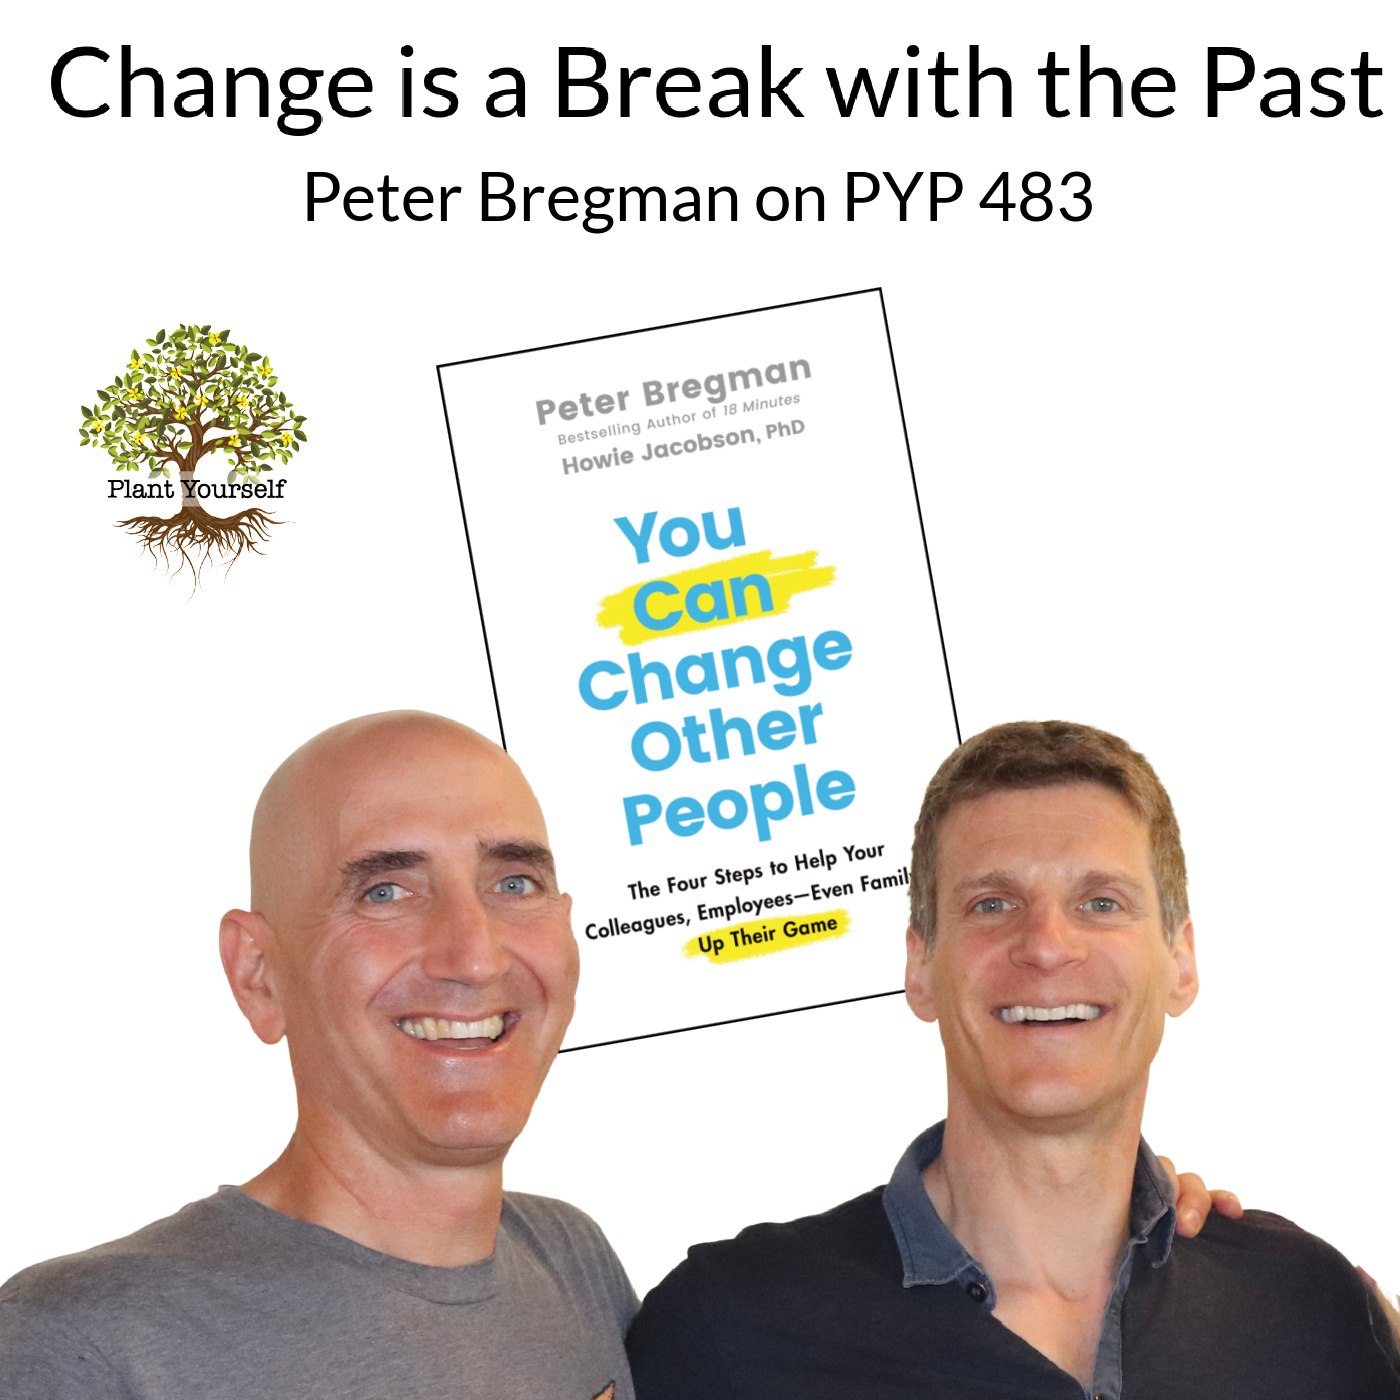 Change is a Break with the Past: Peter Bregman on PYP 483